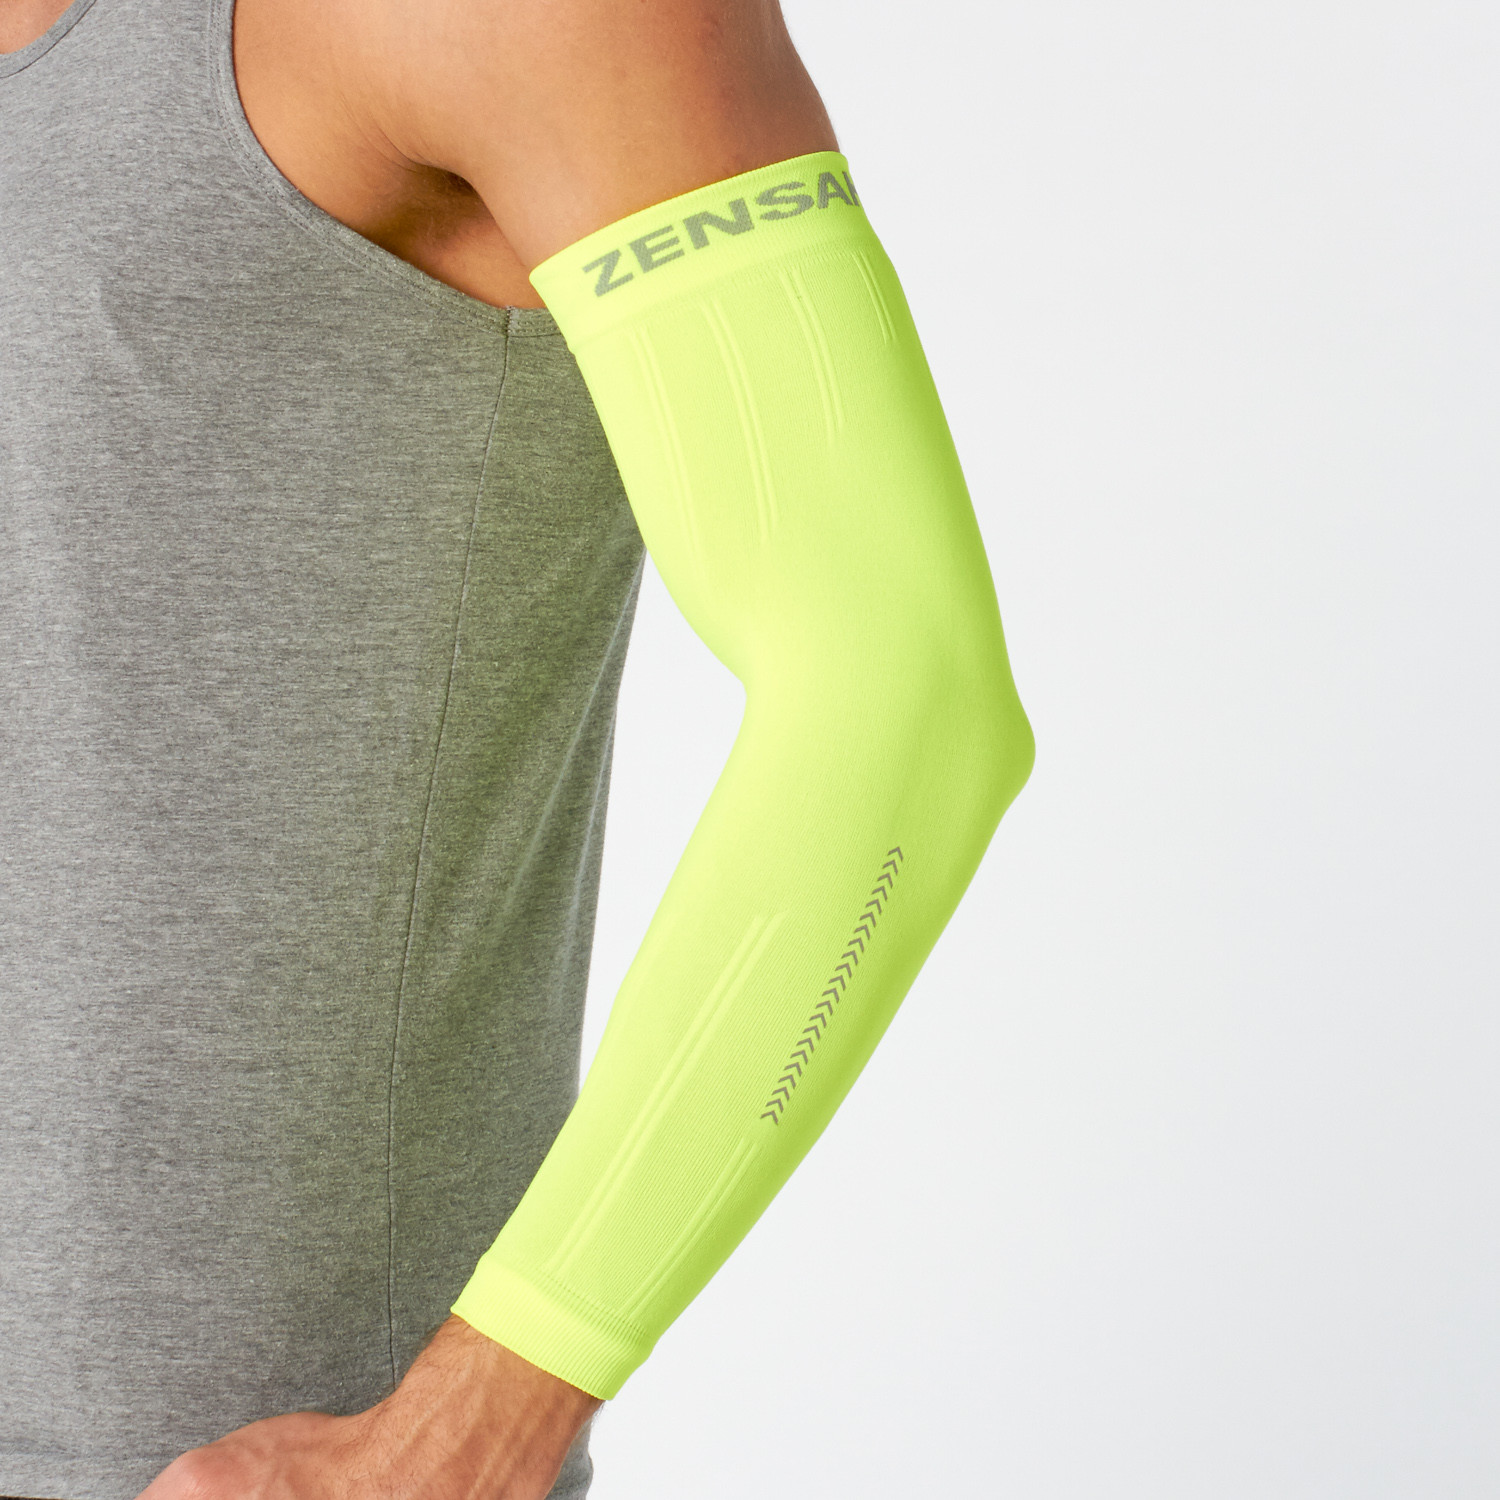 Coolcore The Forearm Shiver Neon Yellow Arm Sleeve size S/M 